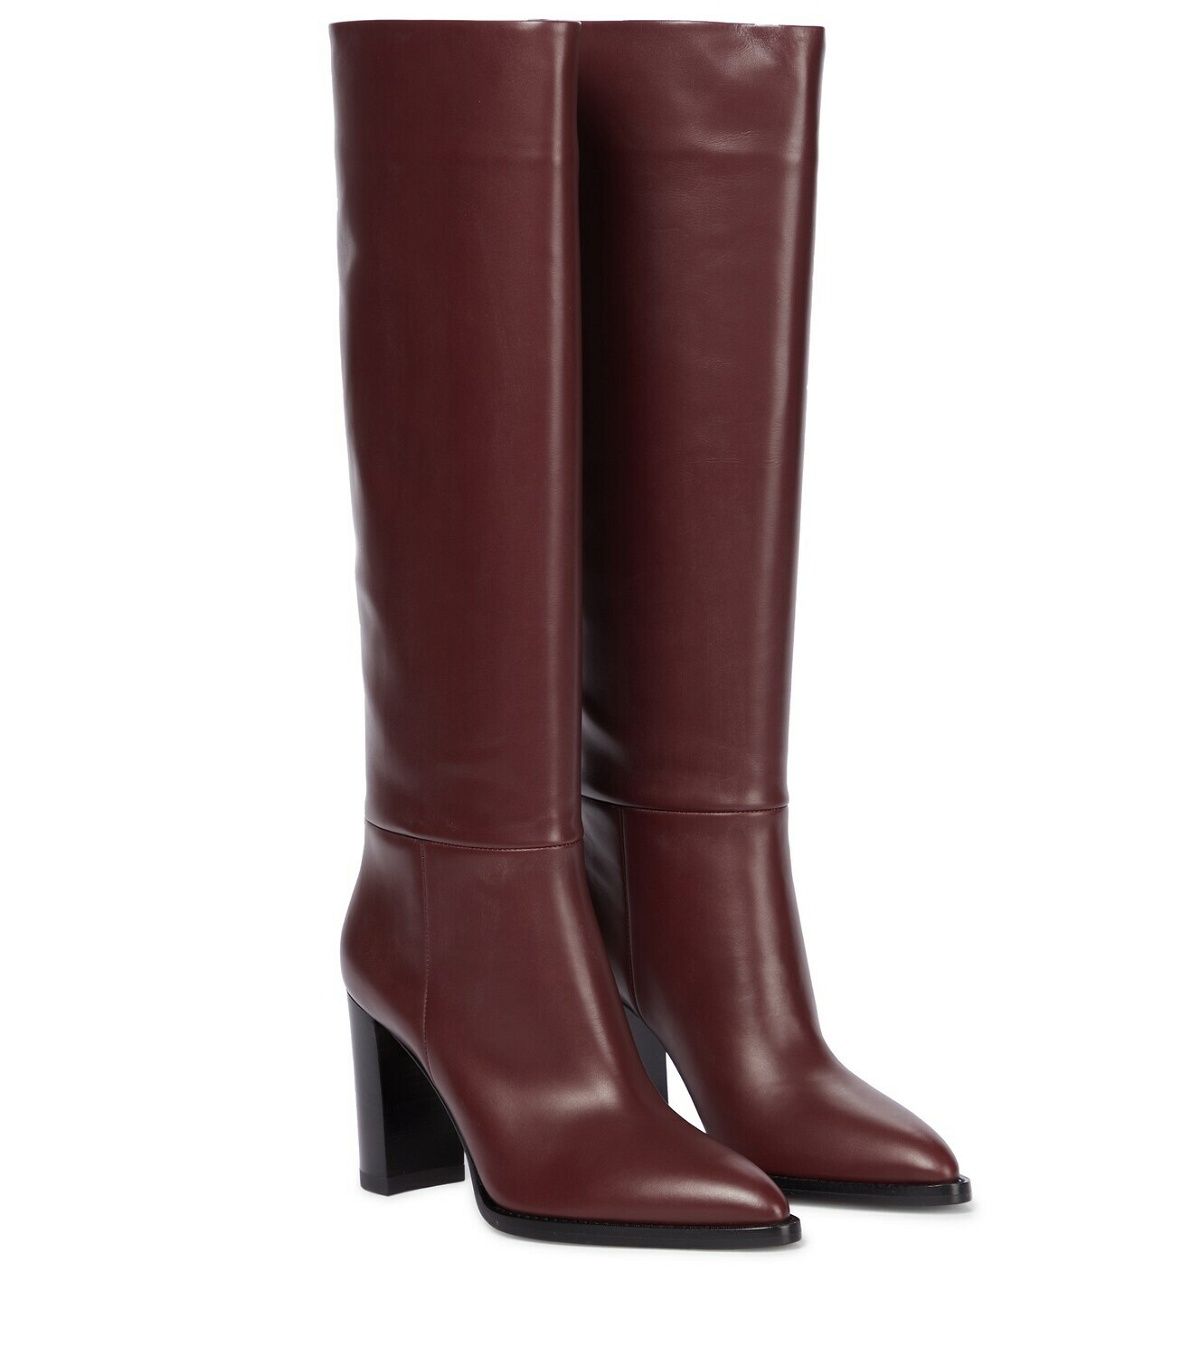 Gianvito Rossi - Kerolyn leather knee-high boots Gianvito Rossi